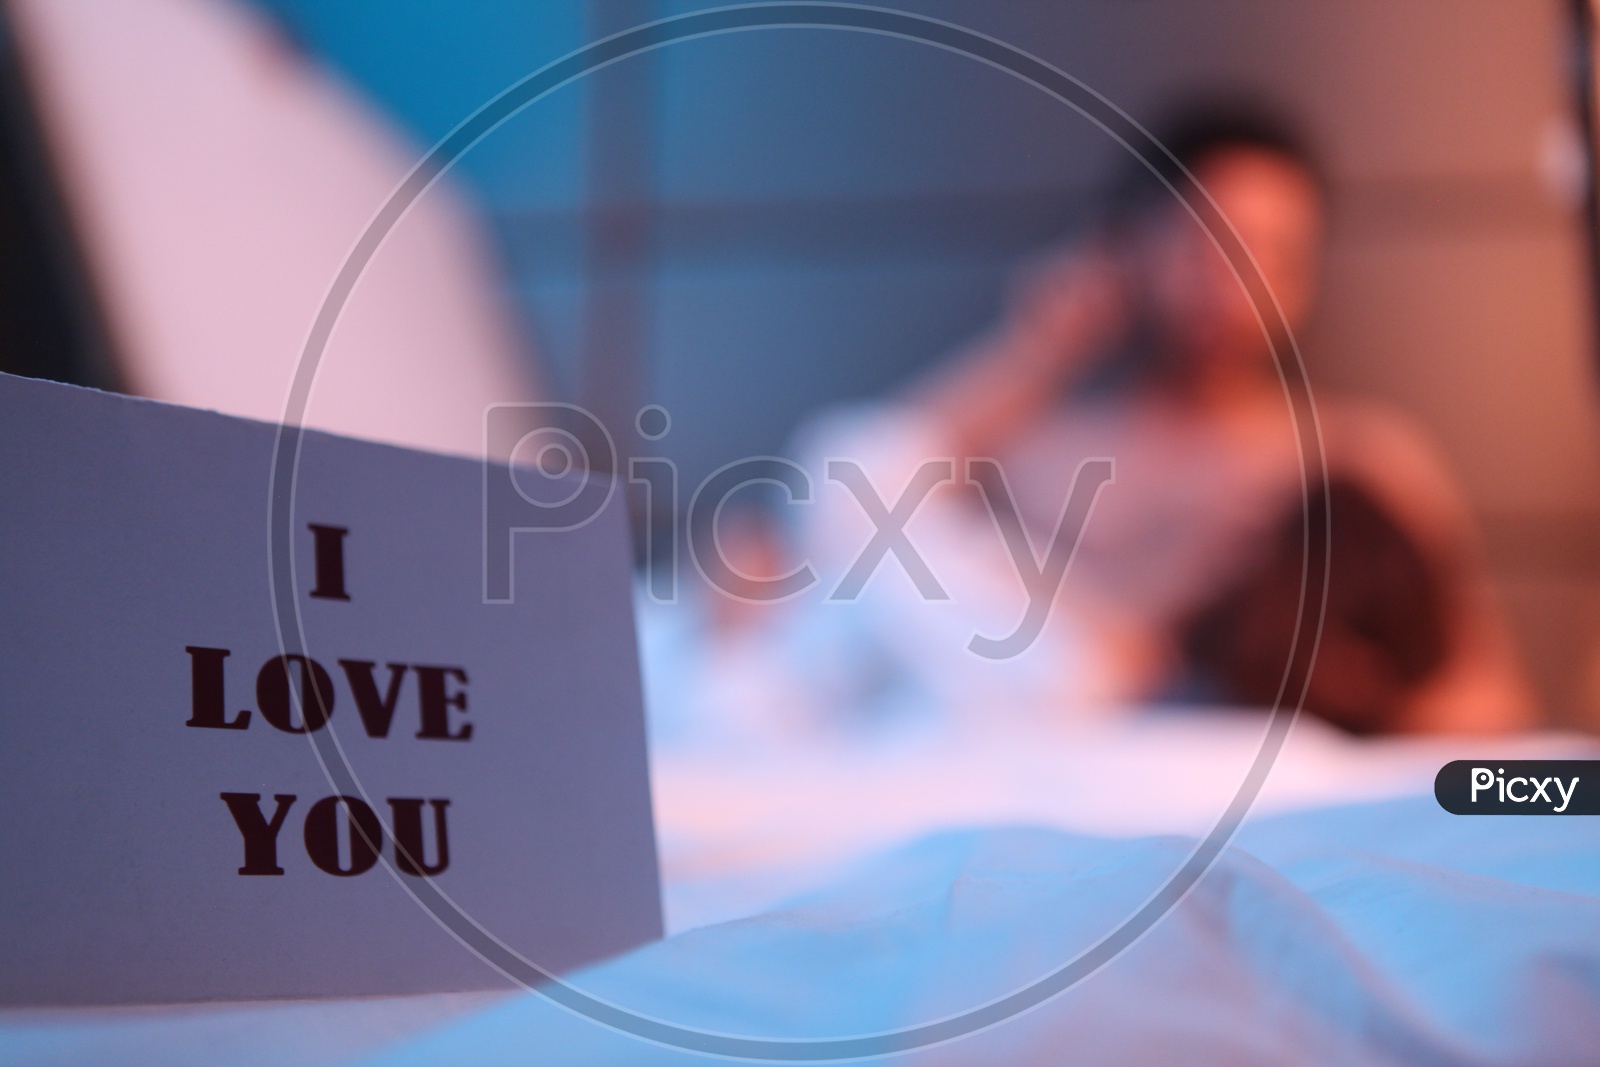 I Love You Placard In a Bedroom